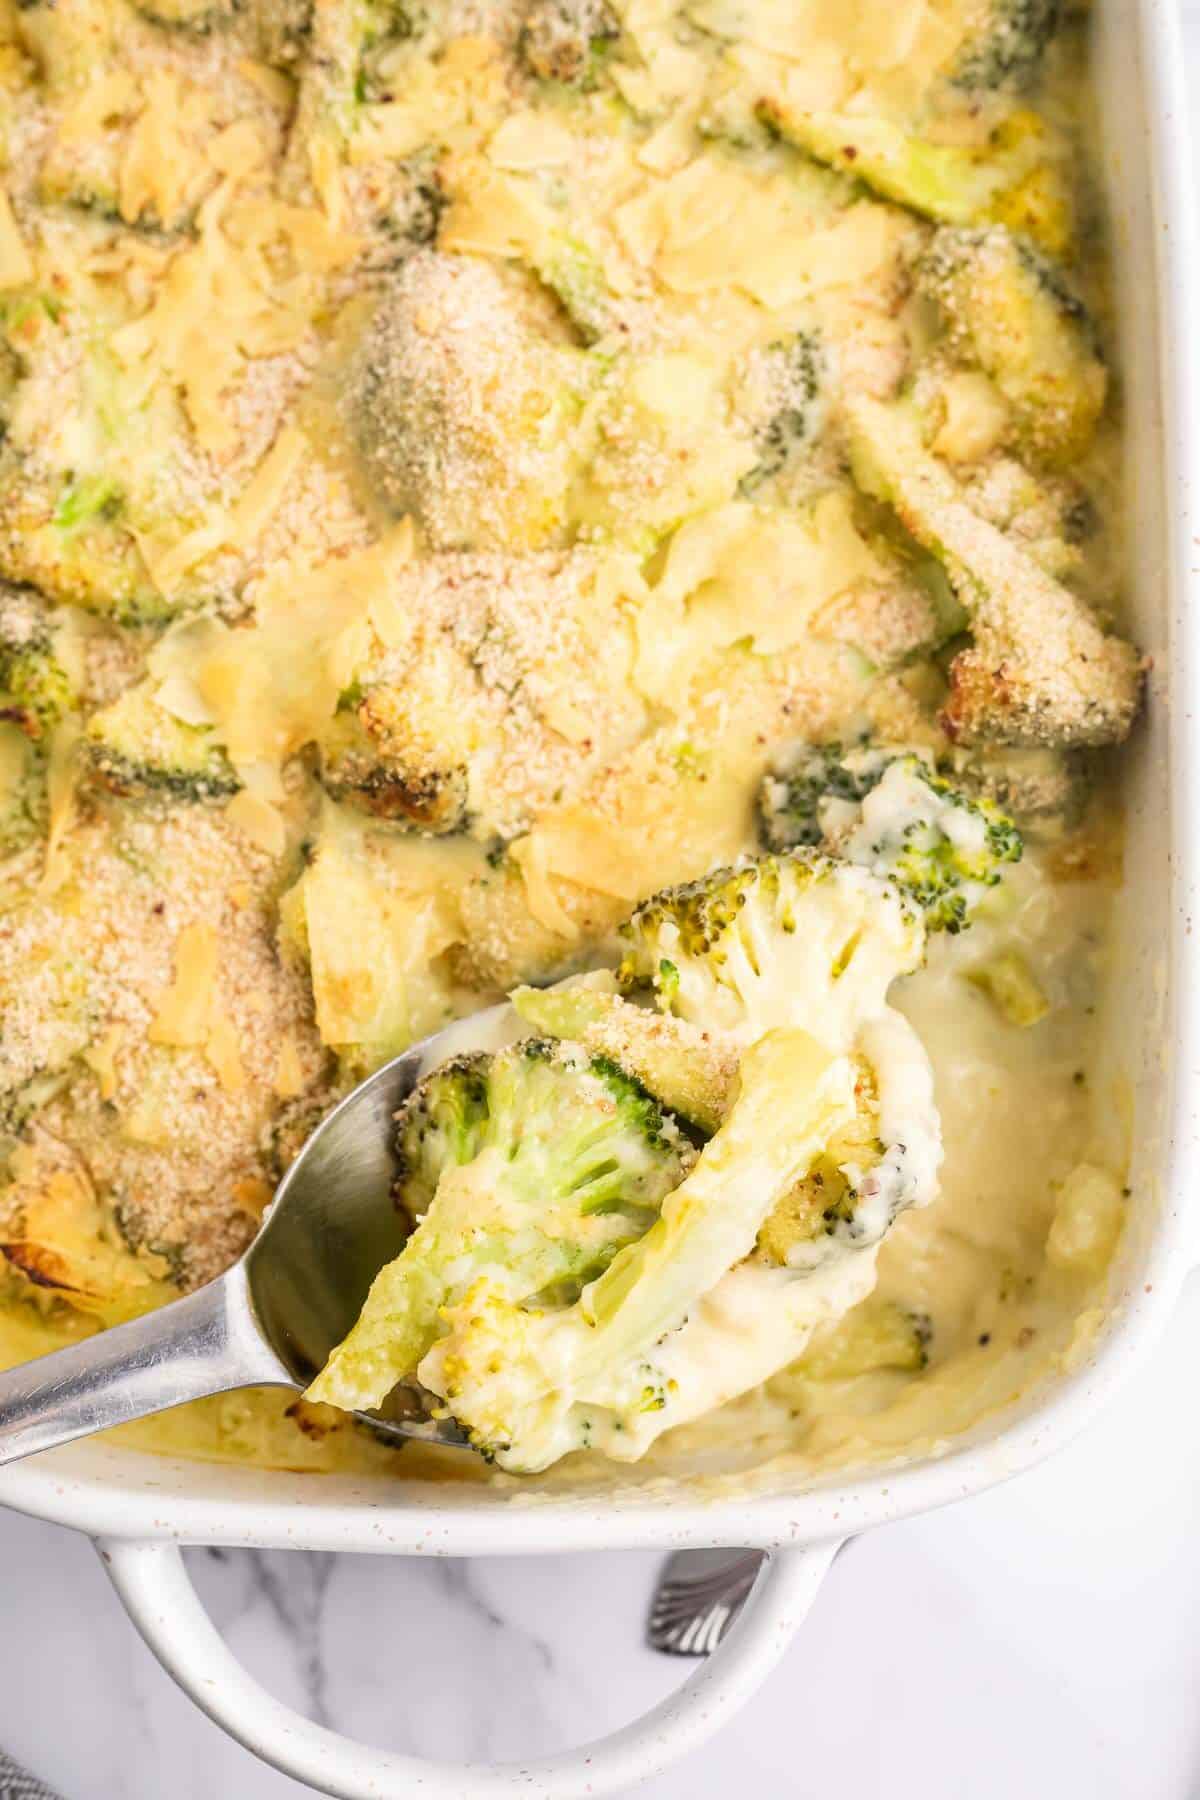 Cheesy Broccoli Au Gratin in a pan being scooped out with a spoon.